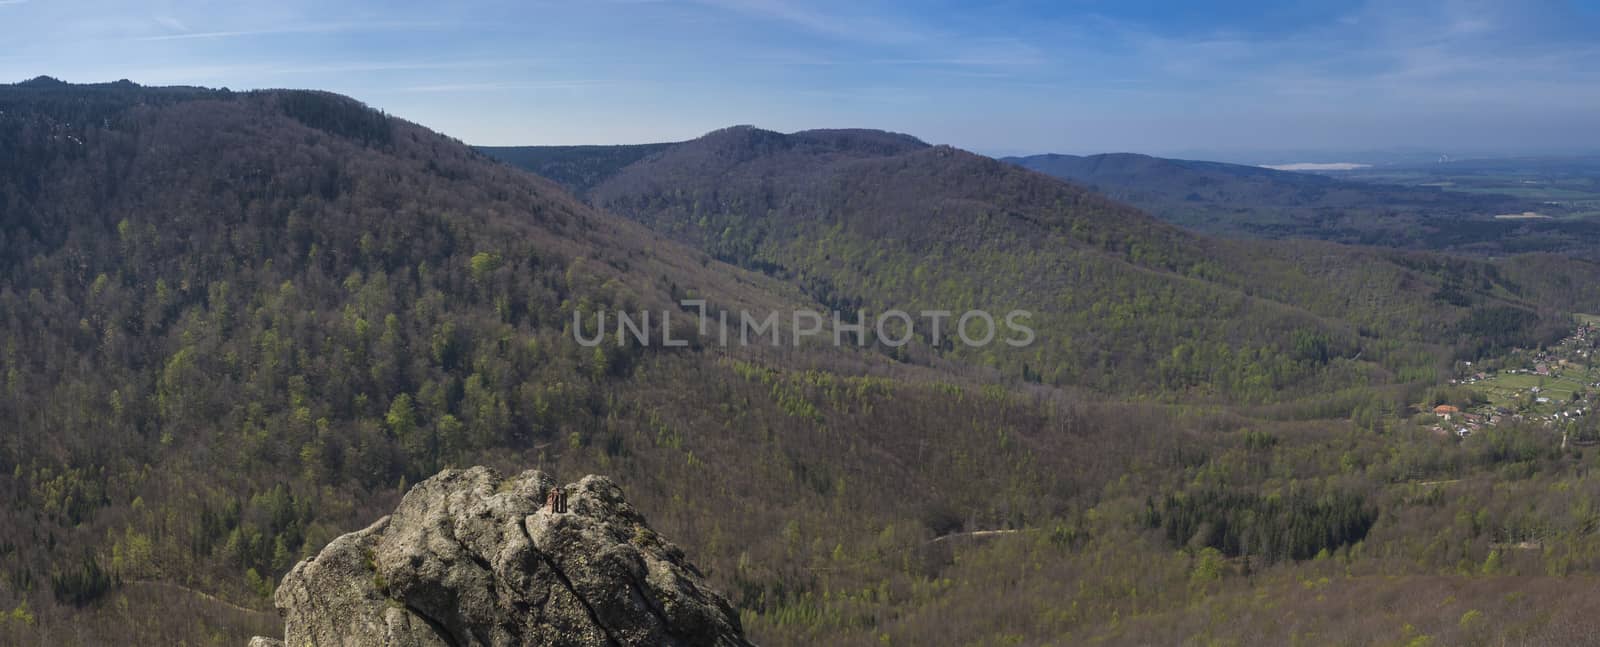 Panoramic landscape of Jizera Mountains jizerske hory, view from peak oresnik mountain with lush green spruce tree forest, hills and village Hejnice, blue sky background by Henkeova